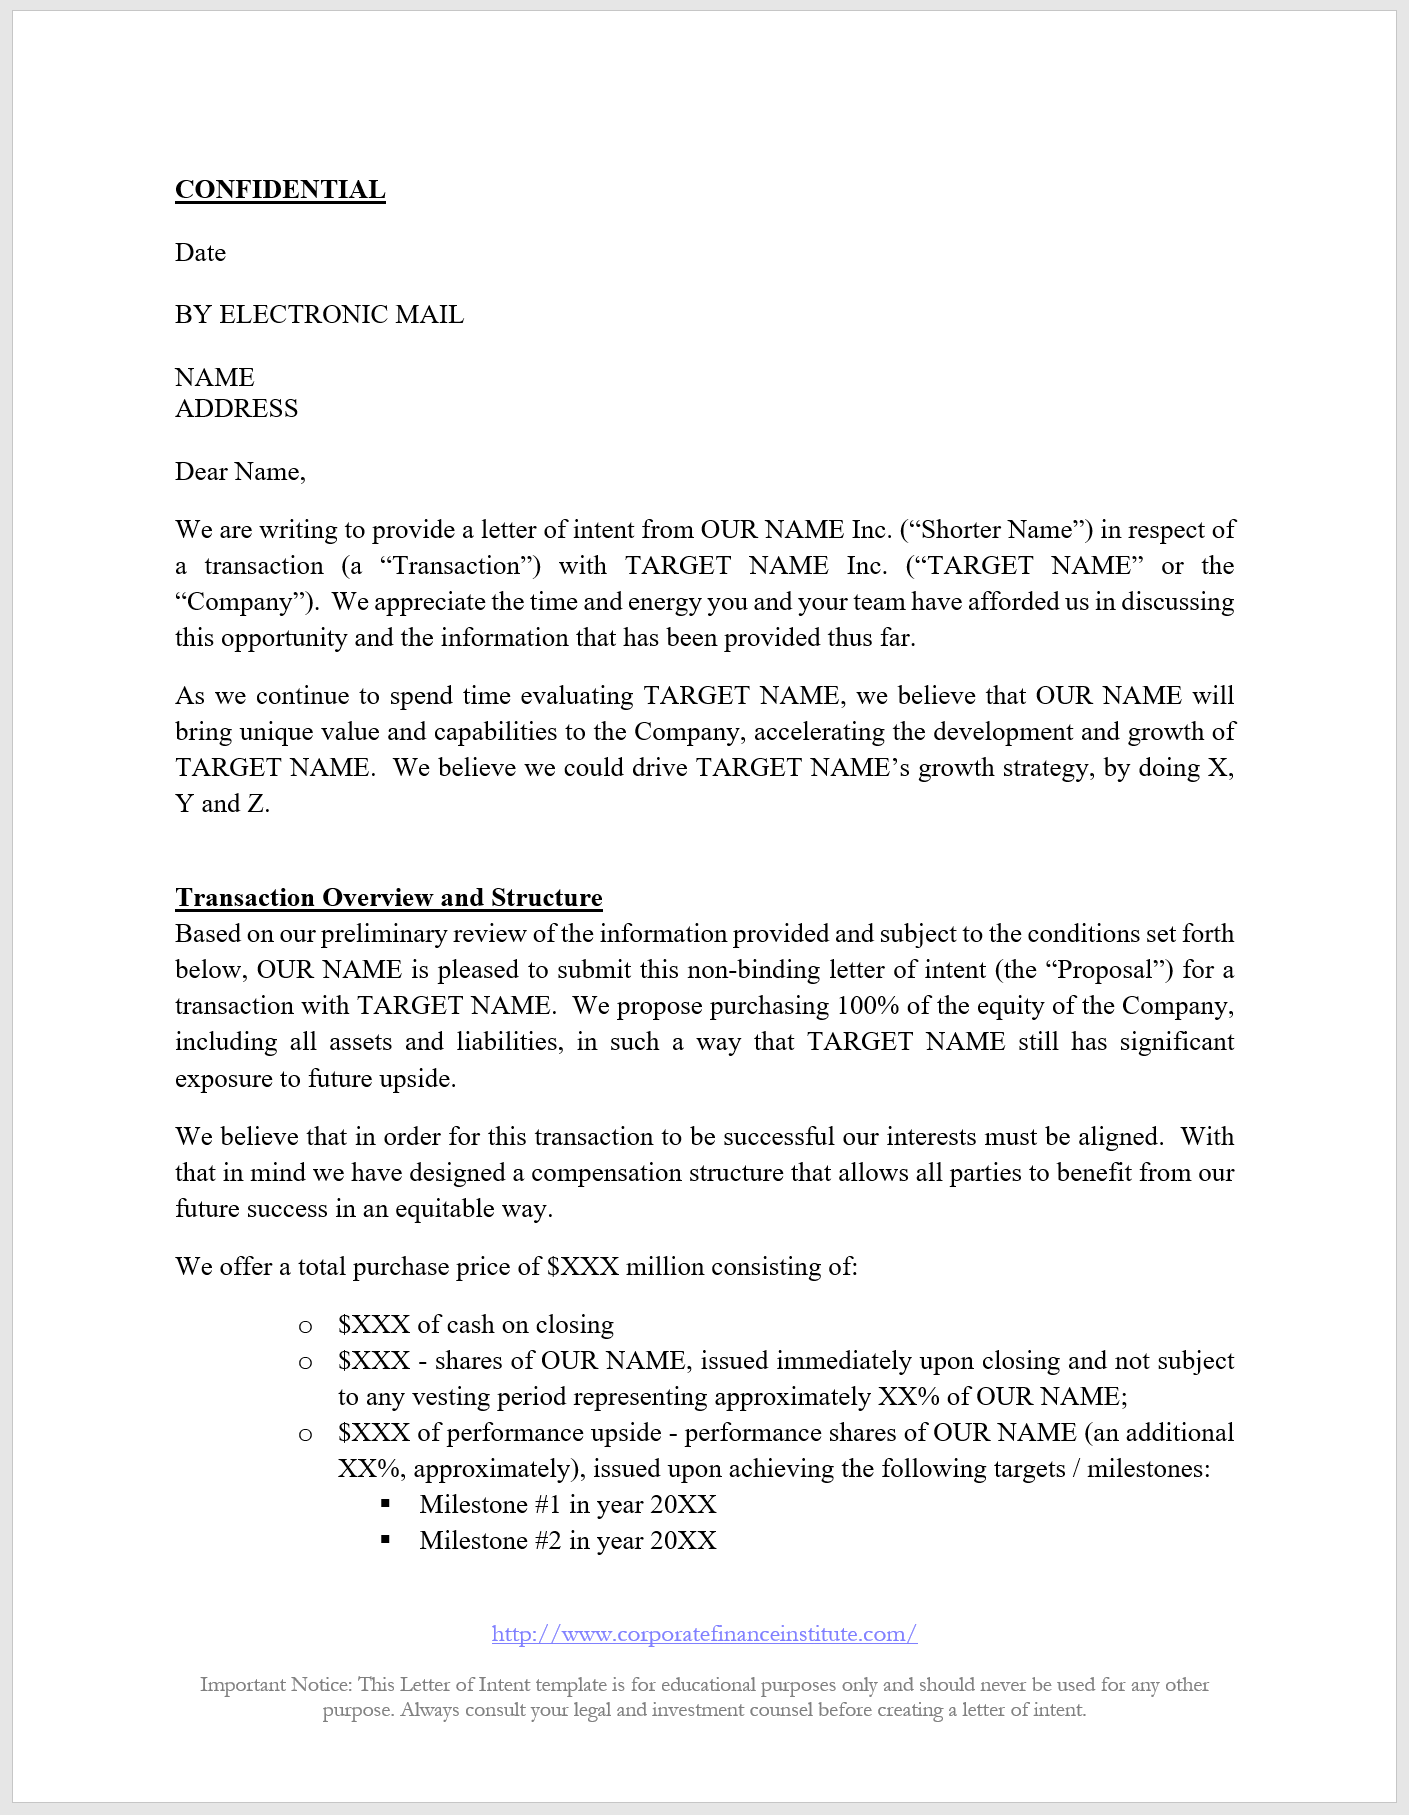 Whats A Letter Of Interest from corporatefinanceinstitute.com